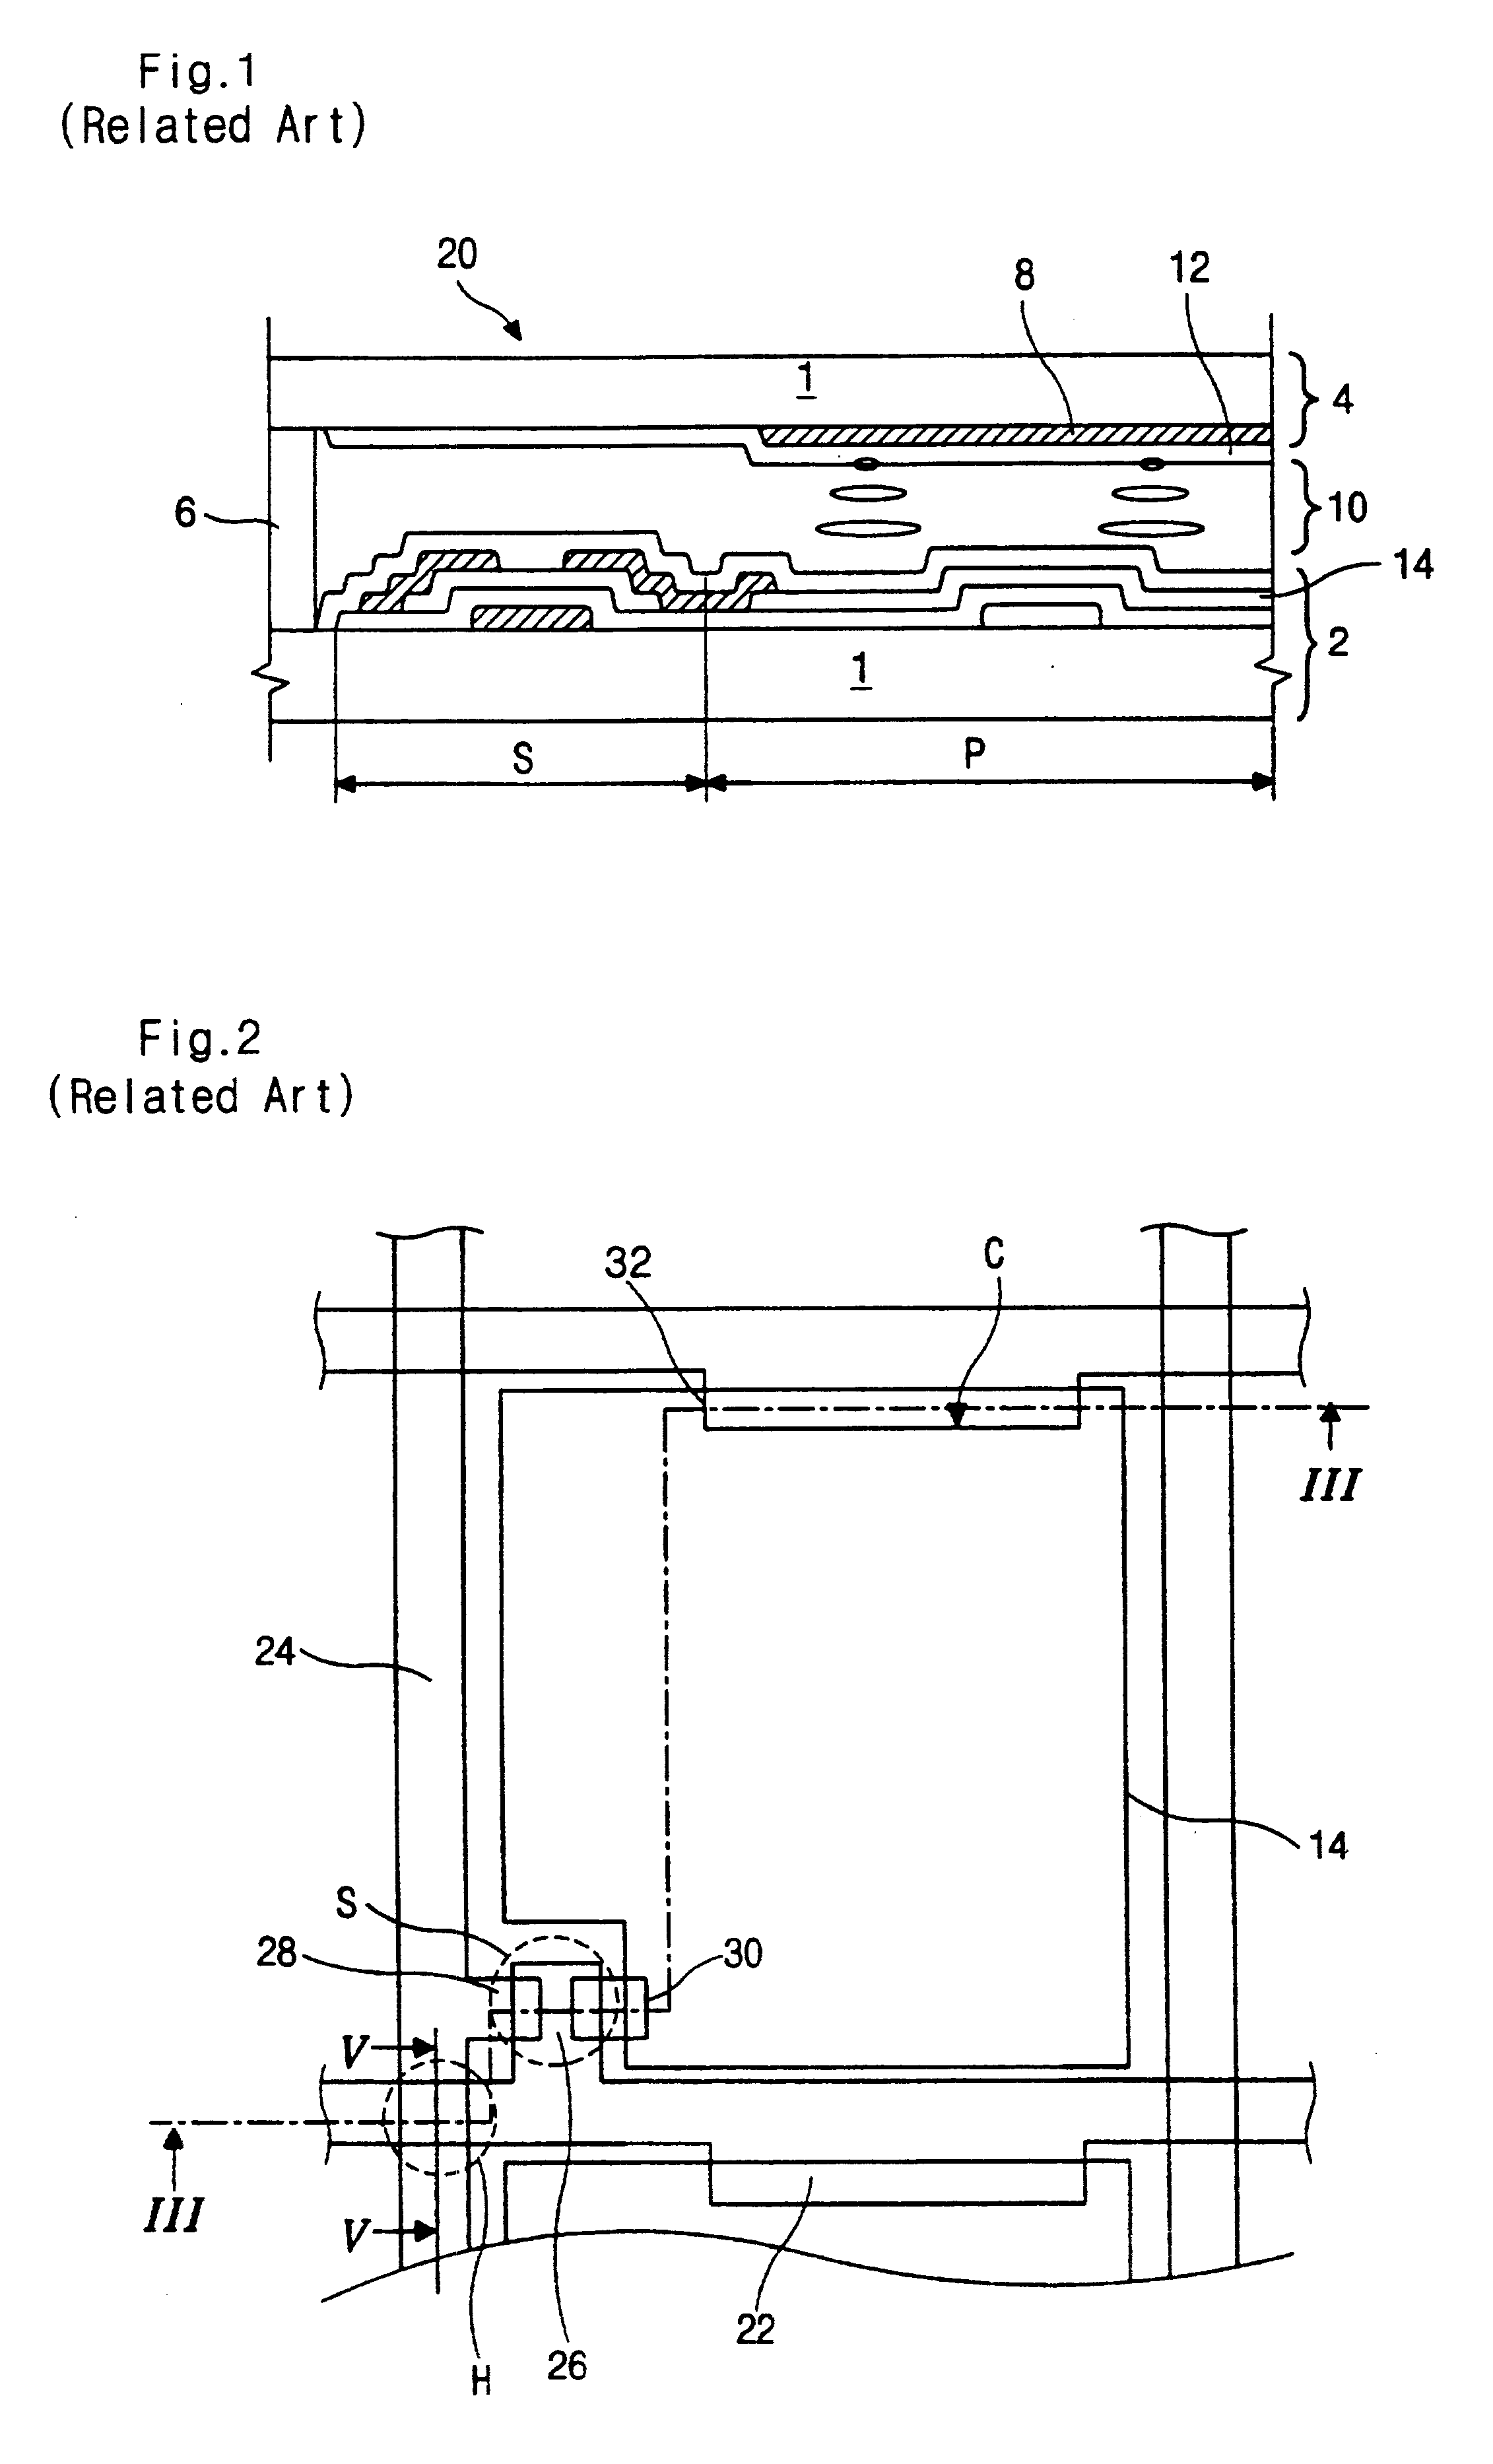 Array substrate for use in LCD device